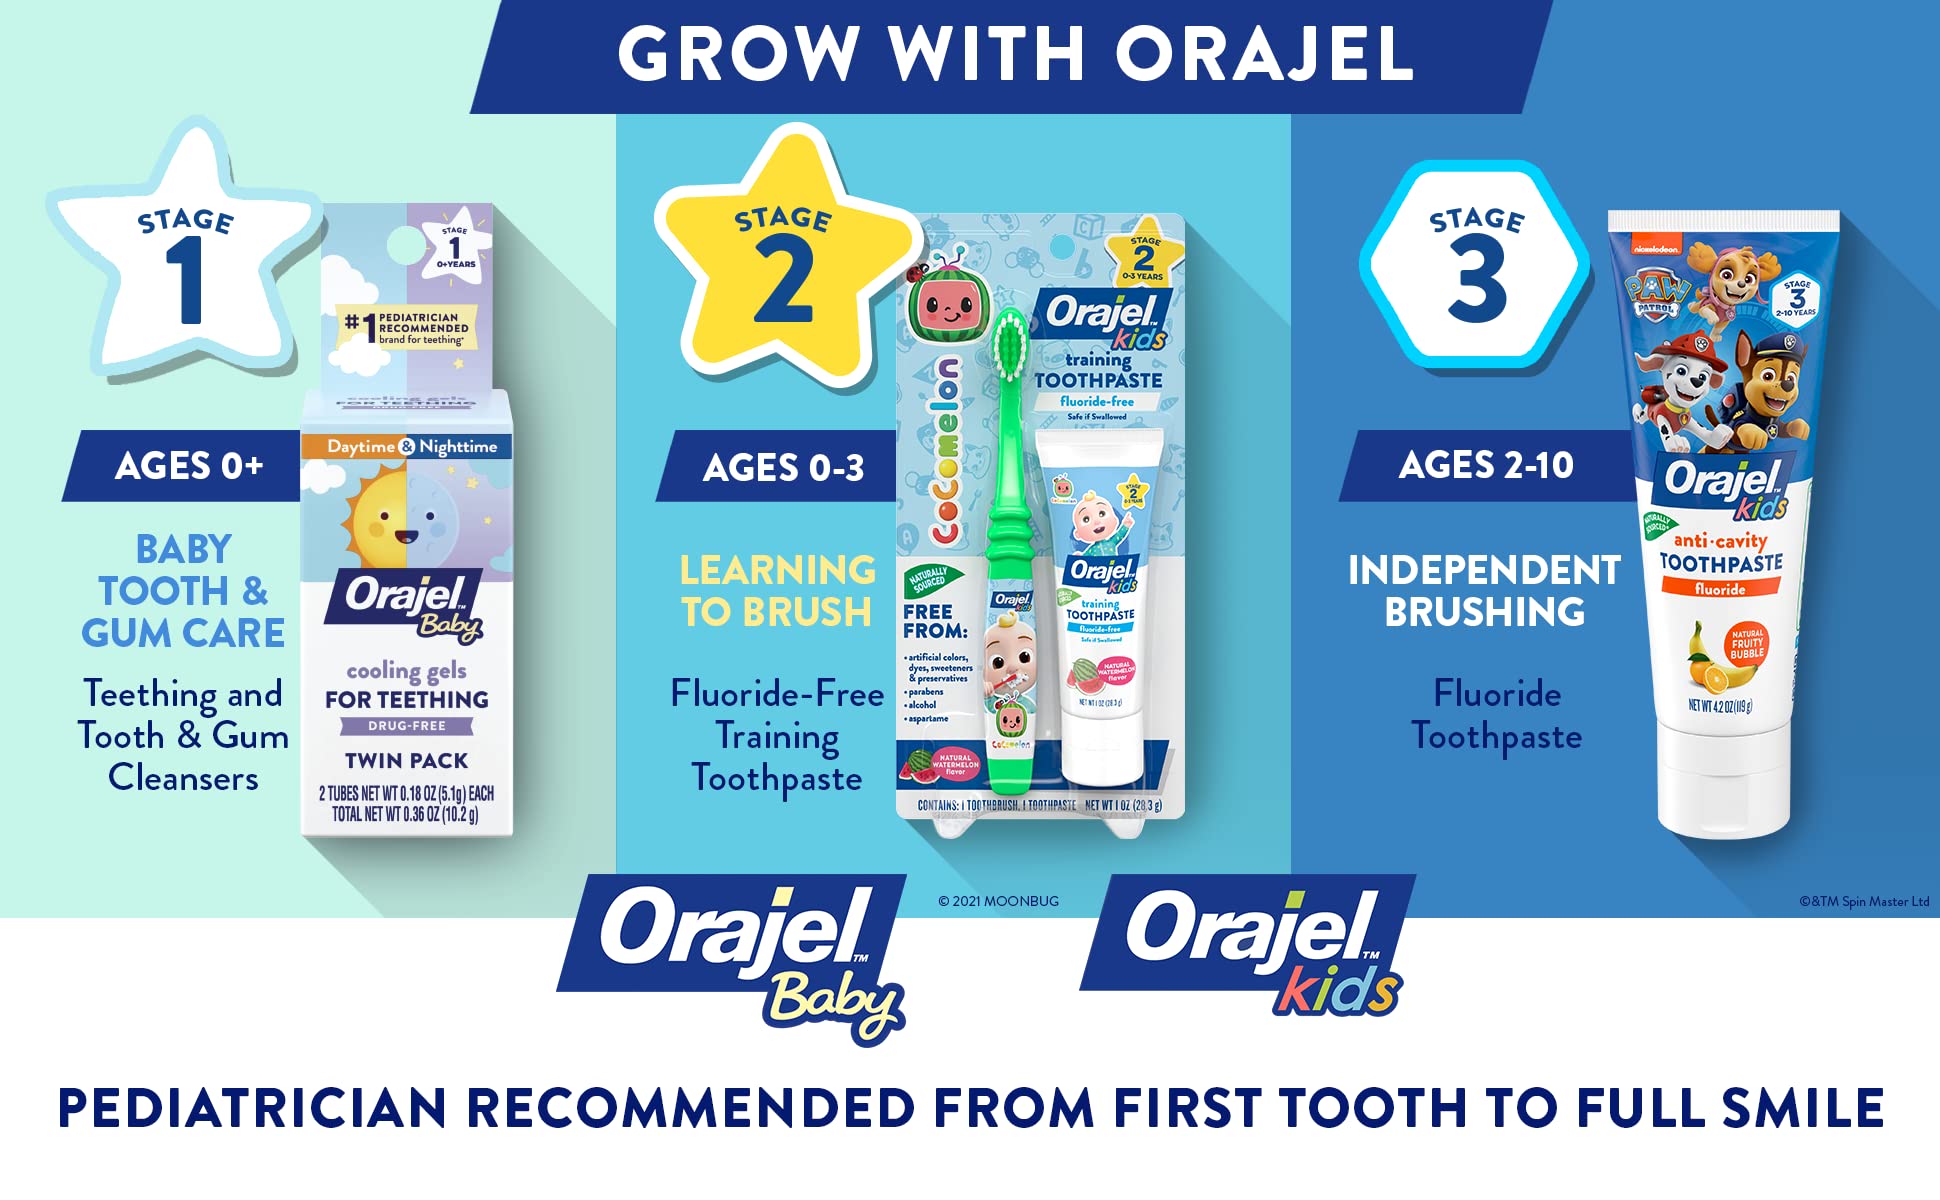 Orajel Baby Daytime Cooling Gel for Teething, Drug-Free, 1 Pediatrician Recommended Brand for Teething*, One .33oz Tube